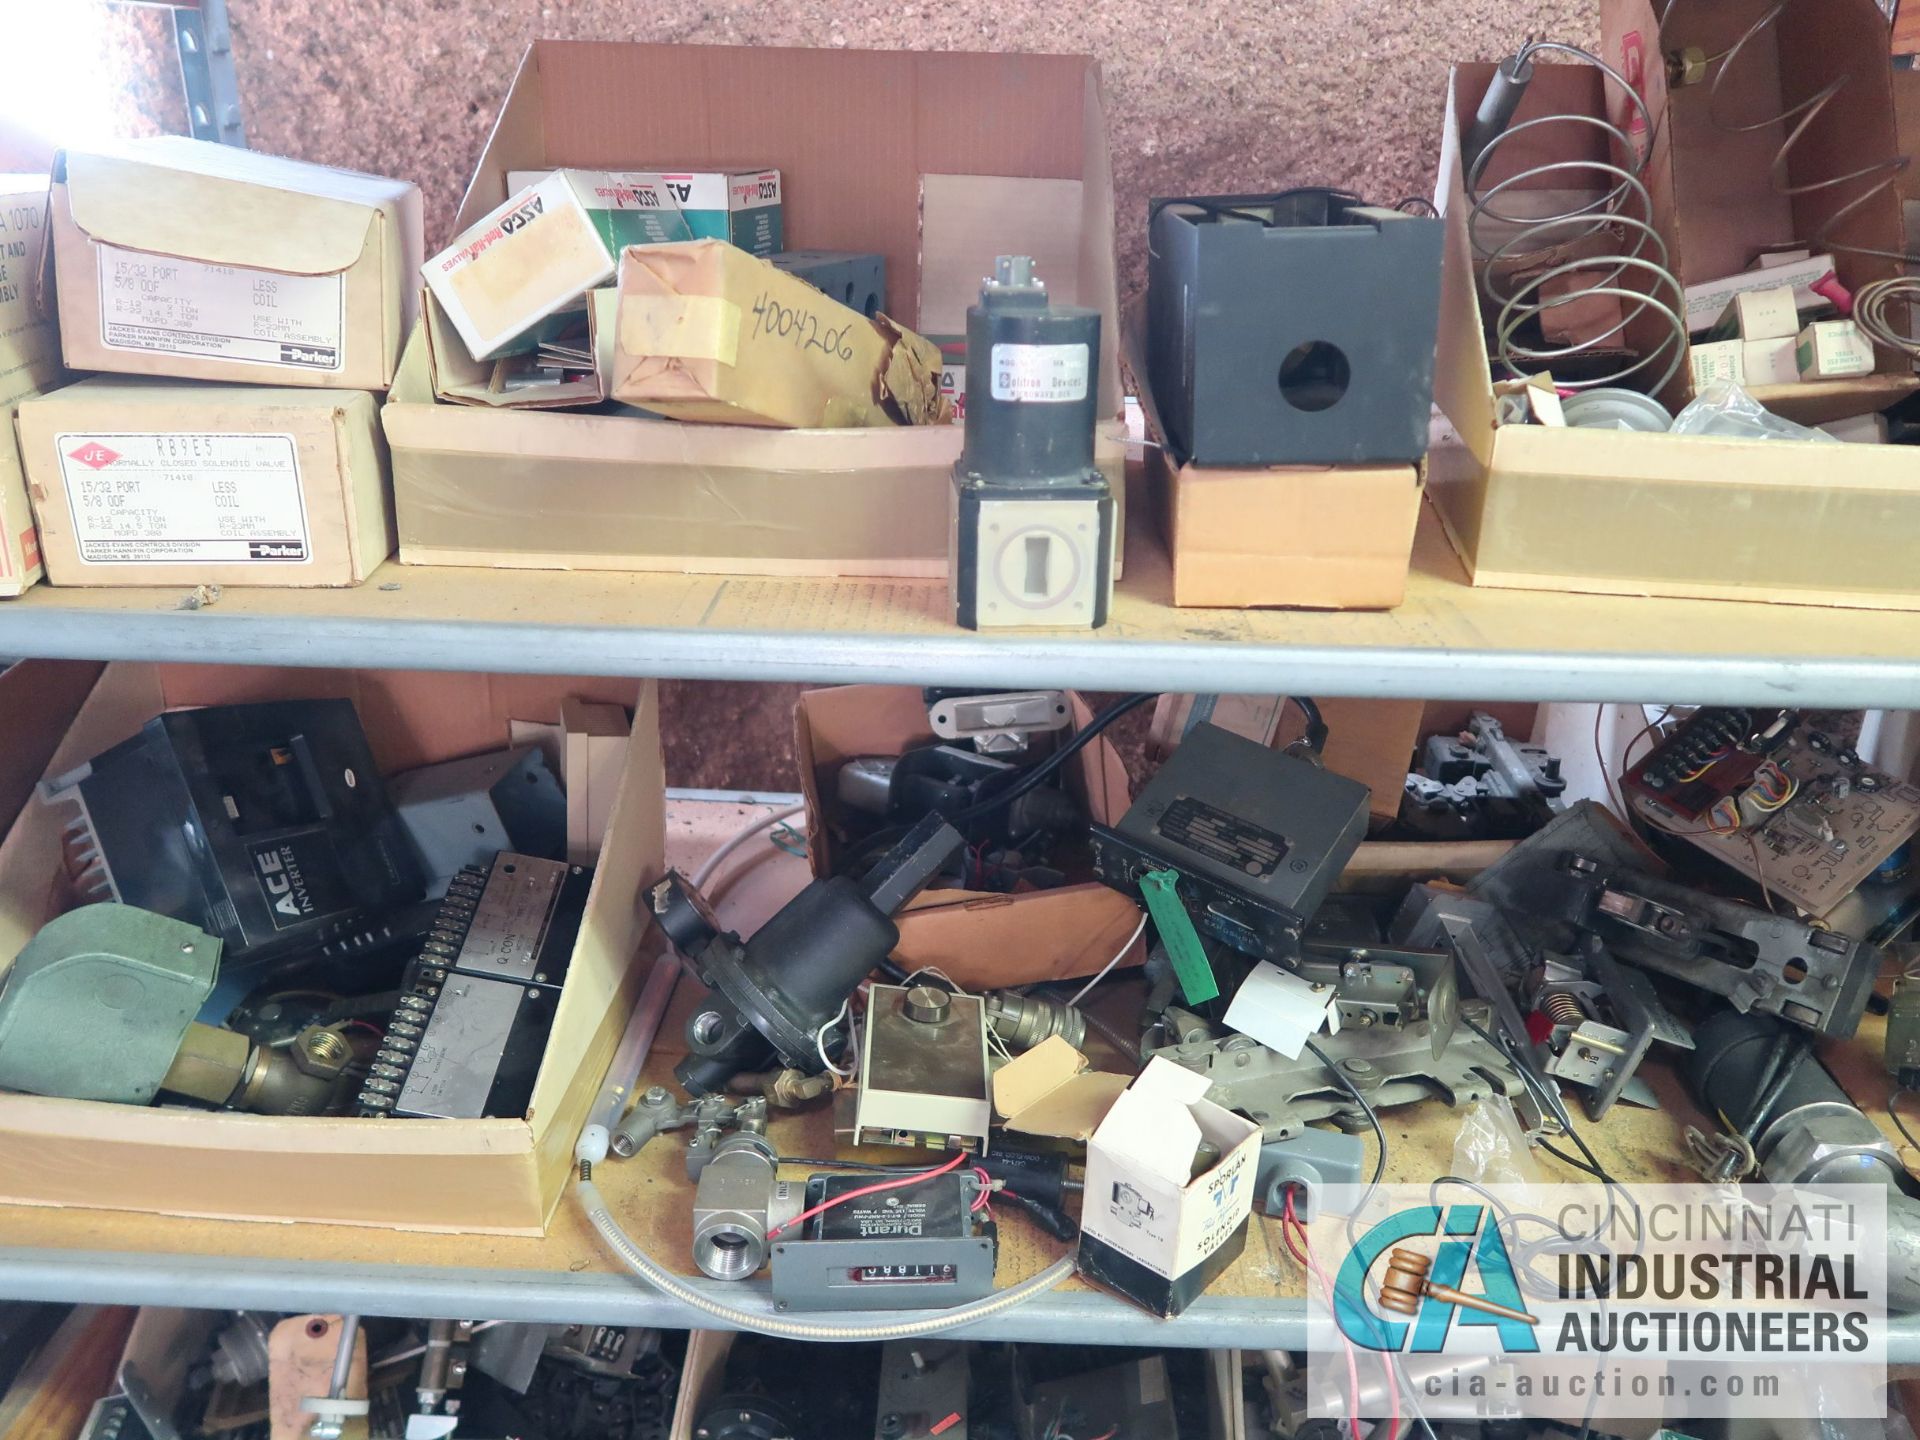 CONTENTS OF (16) SHELVES INCLUDING MISCELLANEOUS VALVES, THERMOSTATS, ANALYZERS, ELECTRICAL, CONTROL - Image 11 of 47